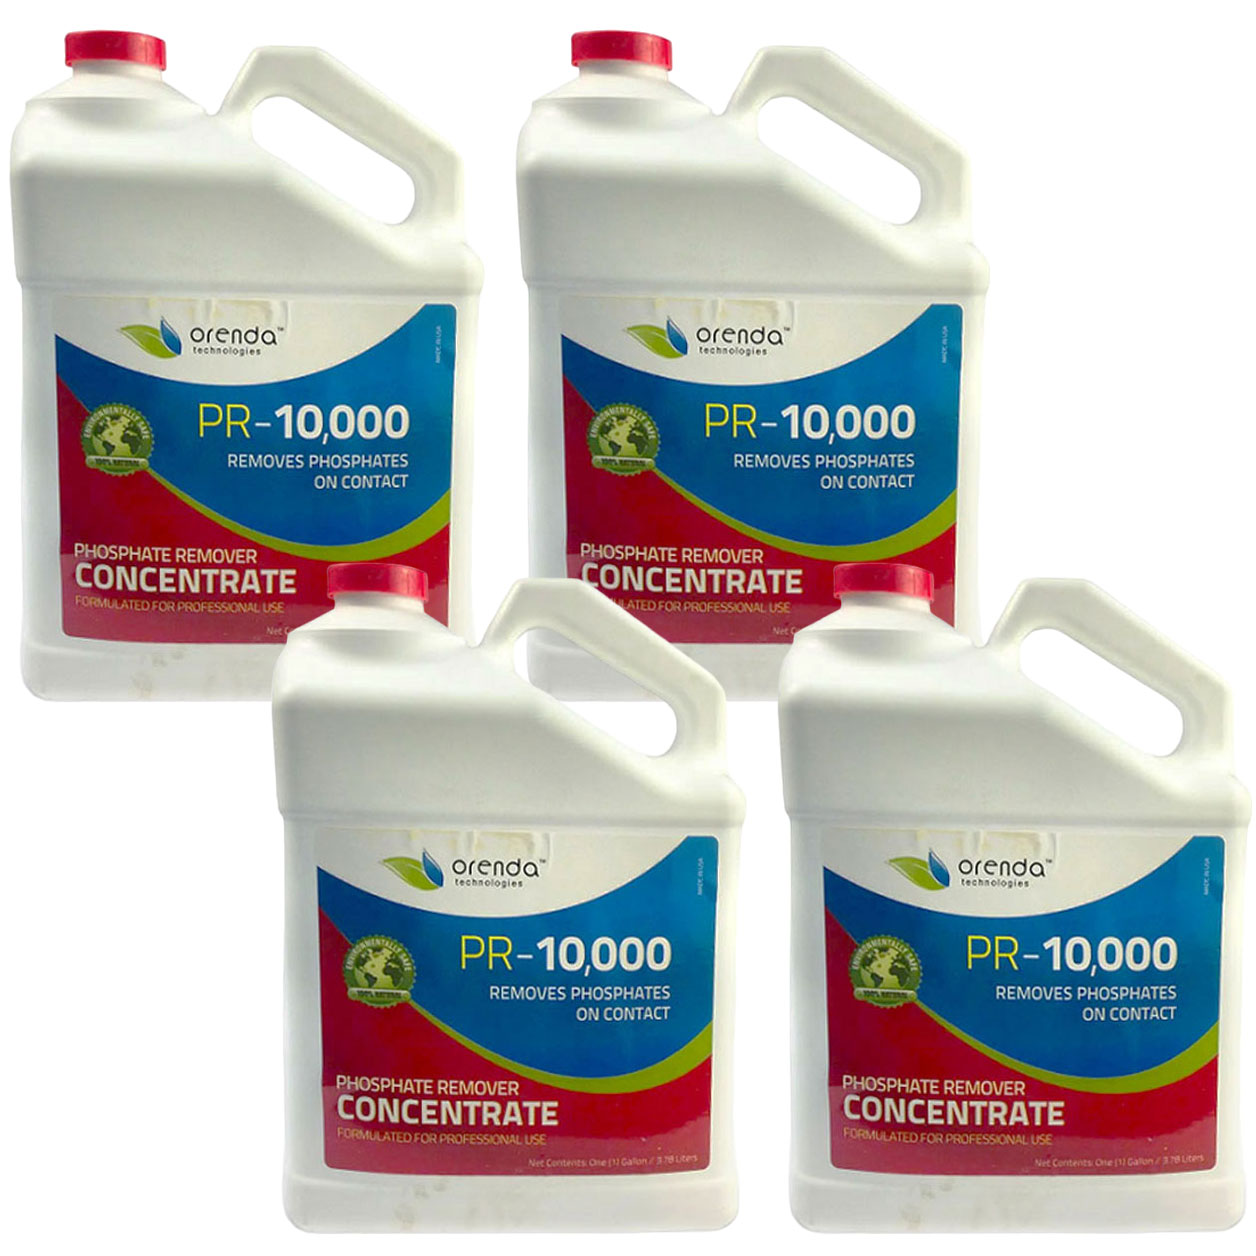 ORE-50-227 Orenda PR-10,000 Phosphate Remover Concentrate 1Gal. - 4 Pack